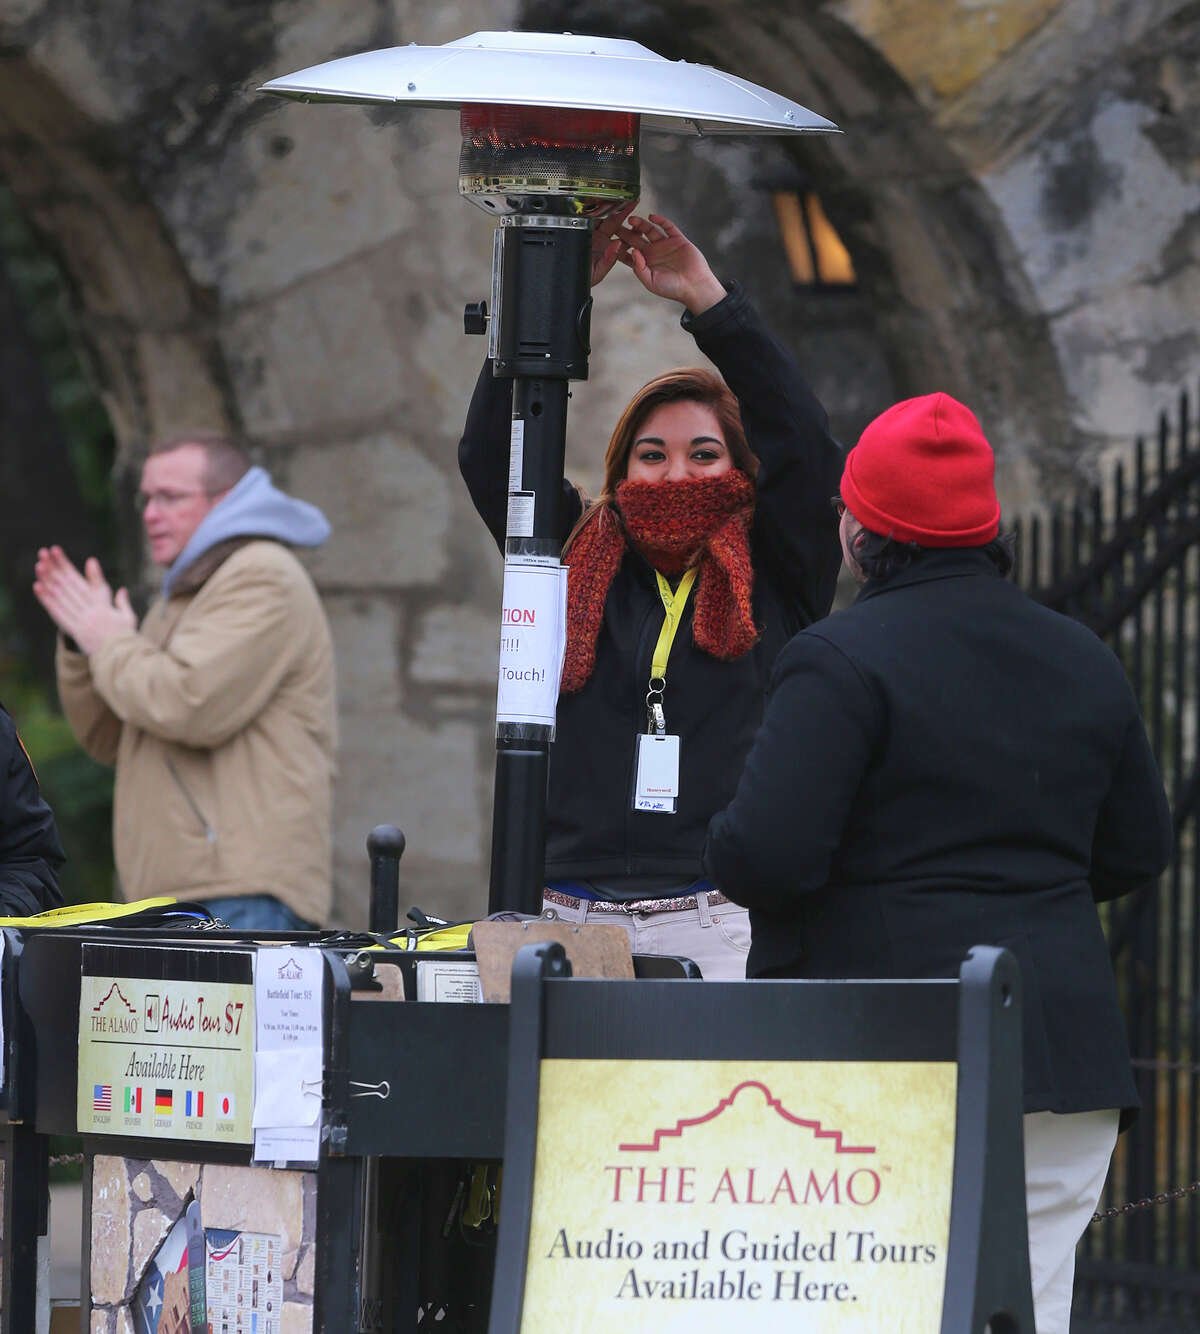 Idalis Salinas (center) warms her hands under a portable heater Friday February 27, 2015 in front of the Alamo in downtown San Antonio. Temperatures in the area have been in the 30 degree range and might make it into the 40s by this afternoon.